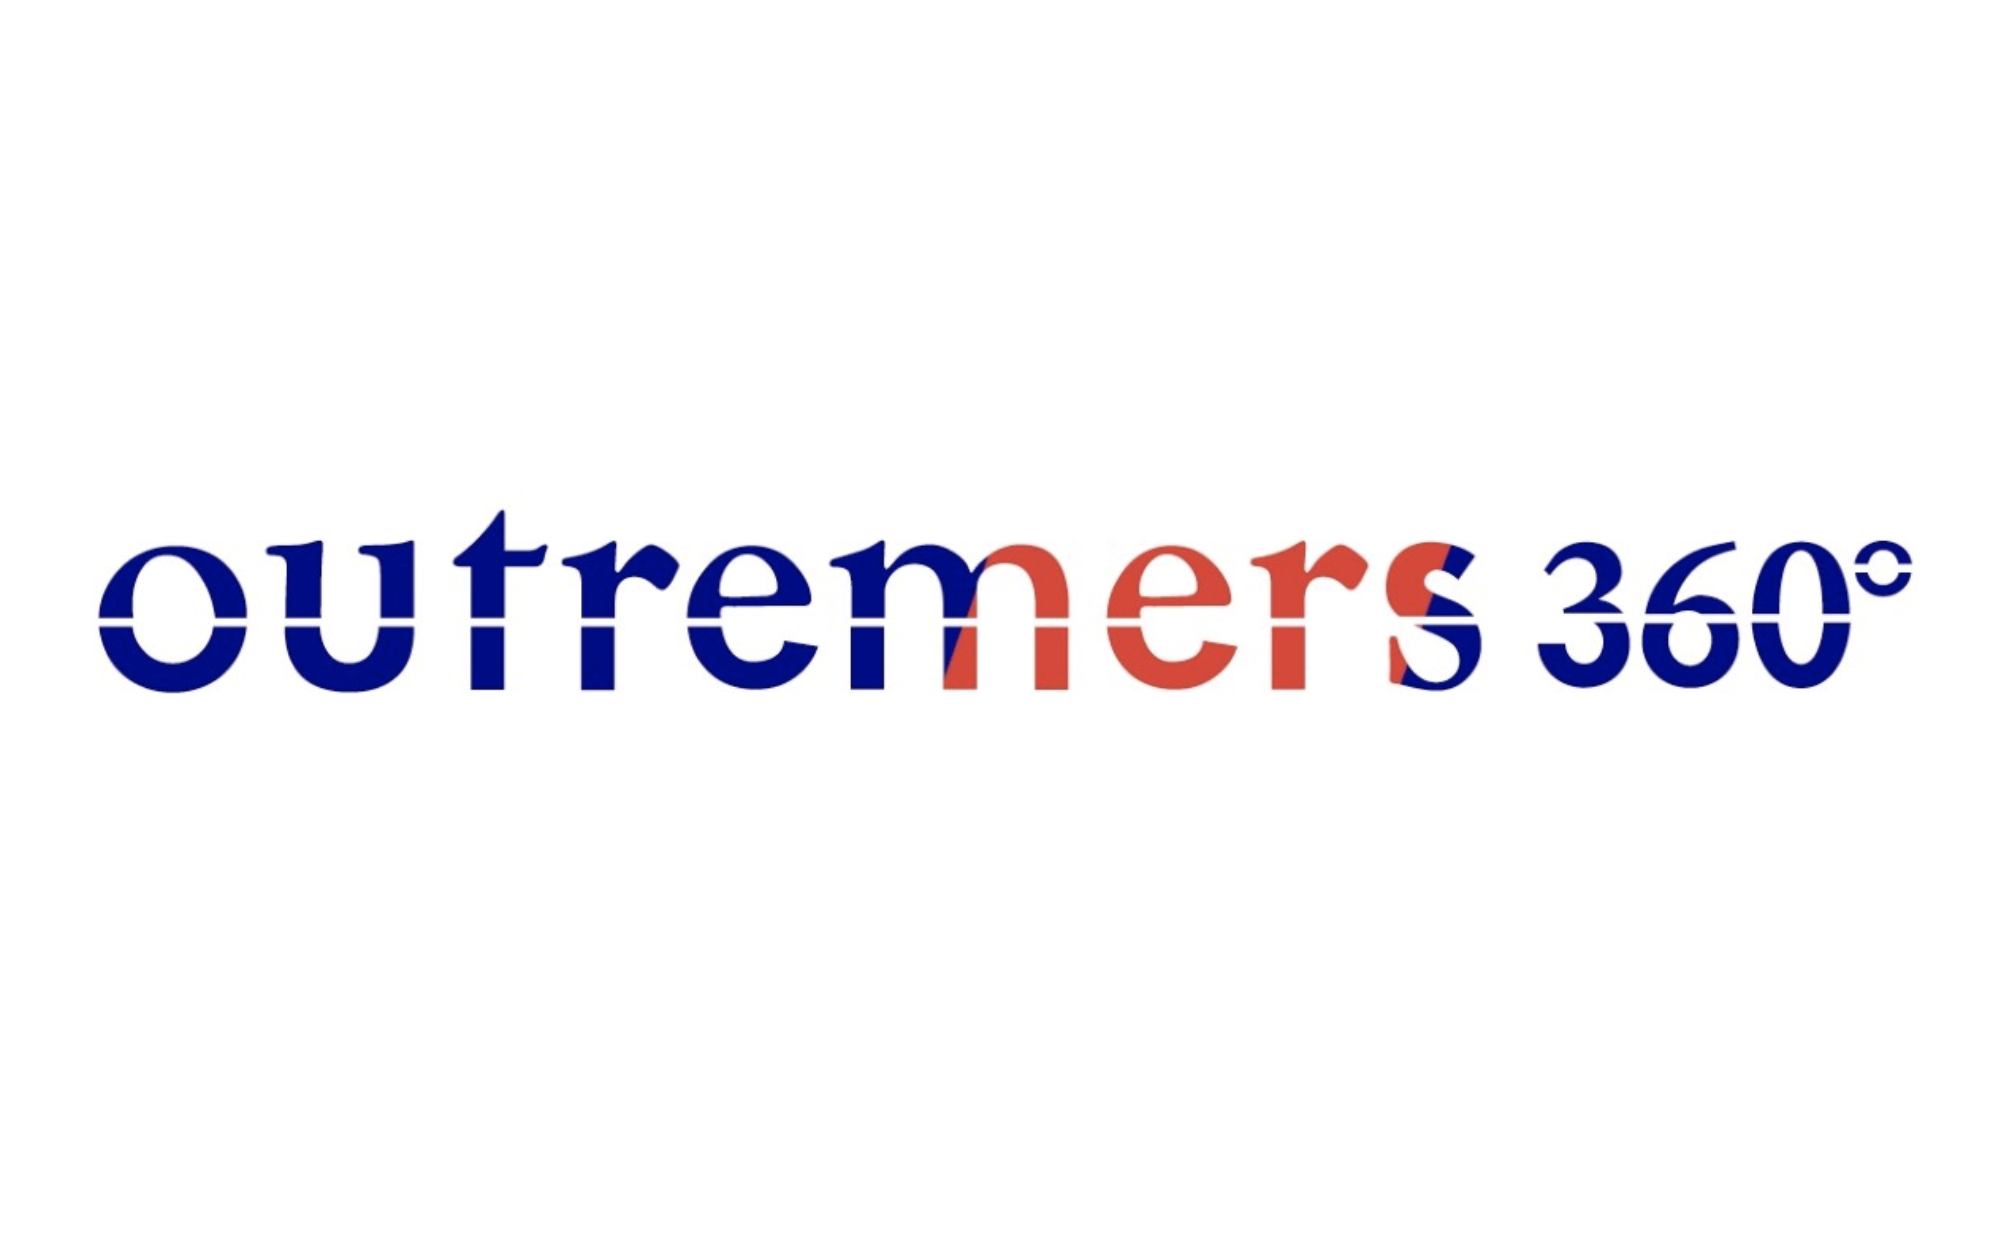 outremer 360